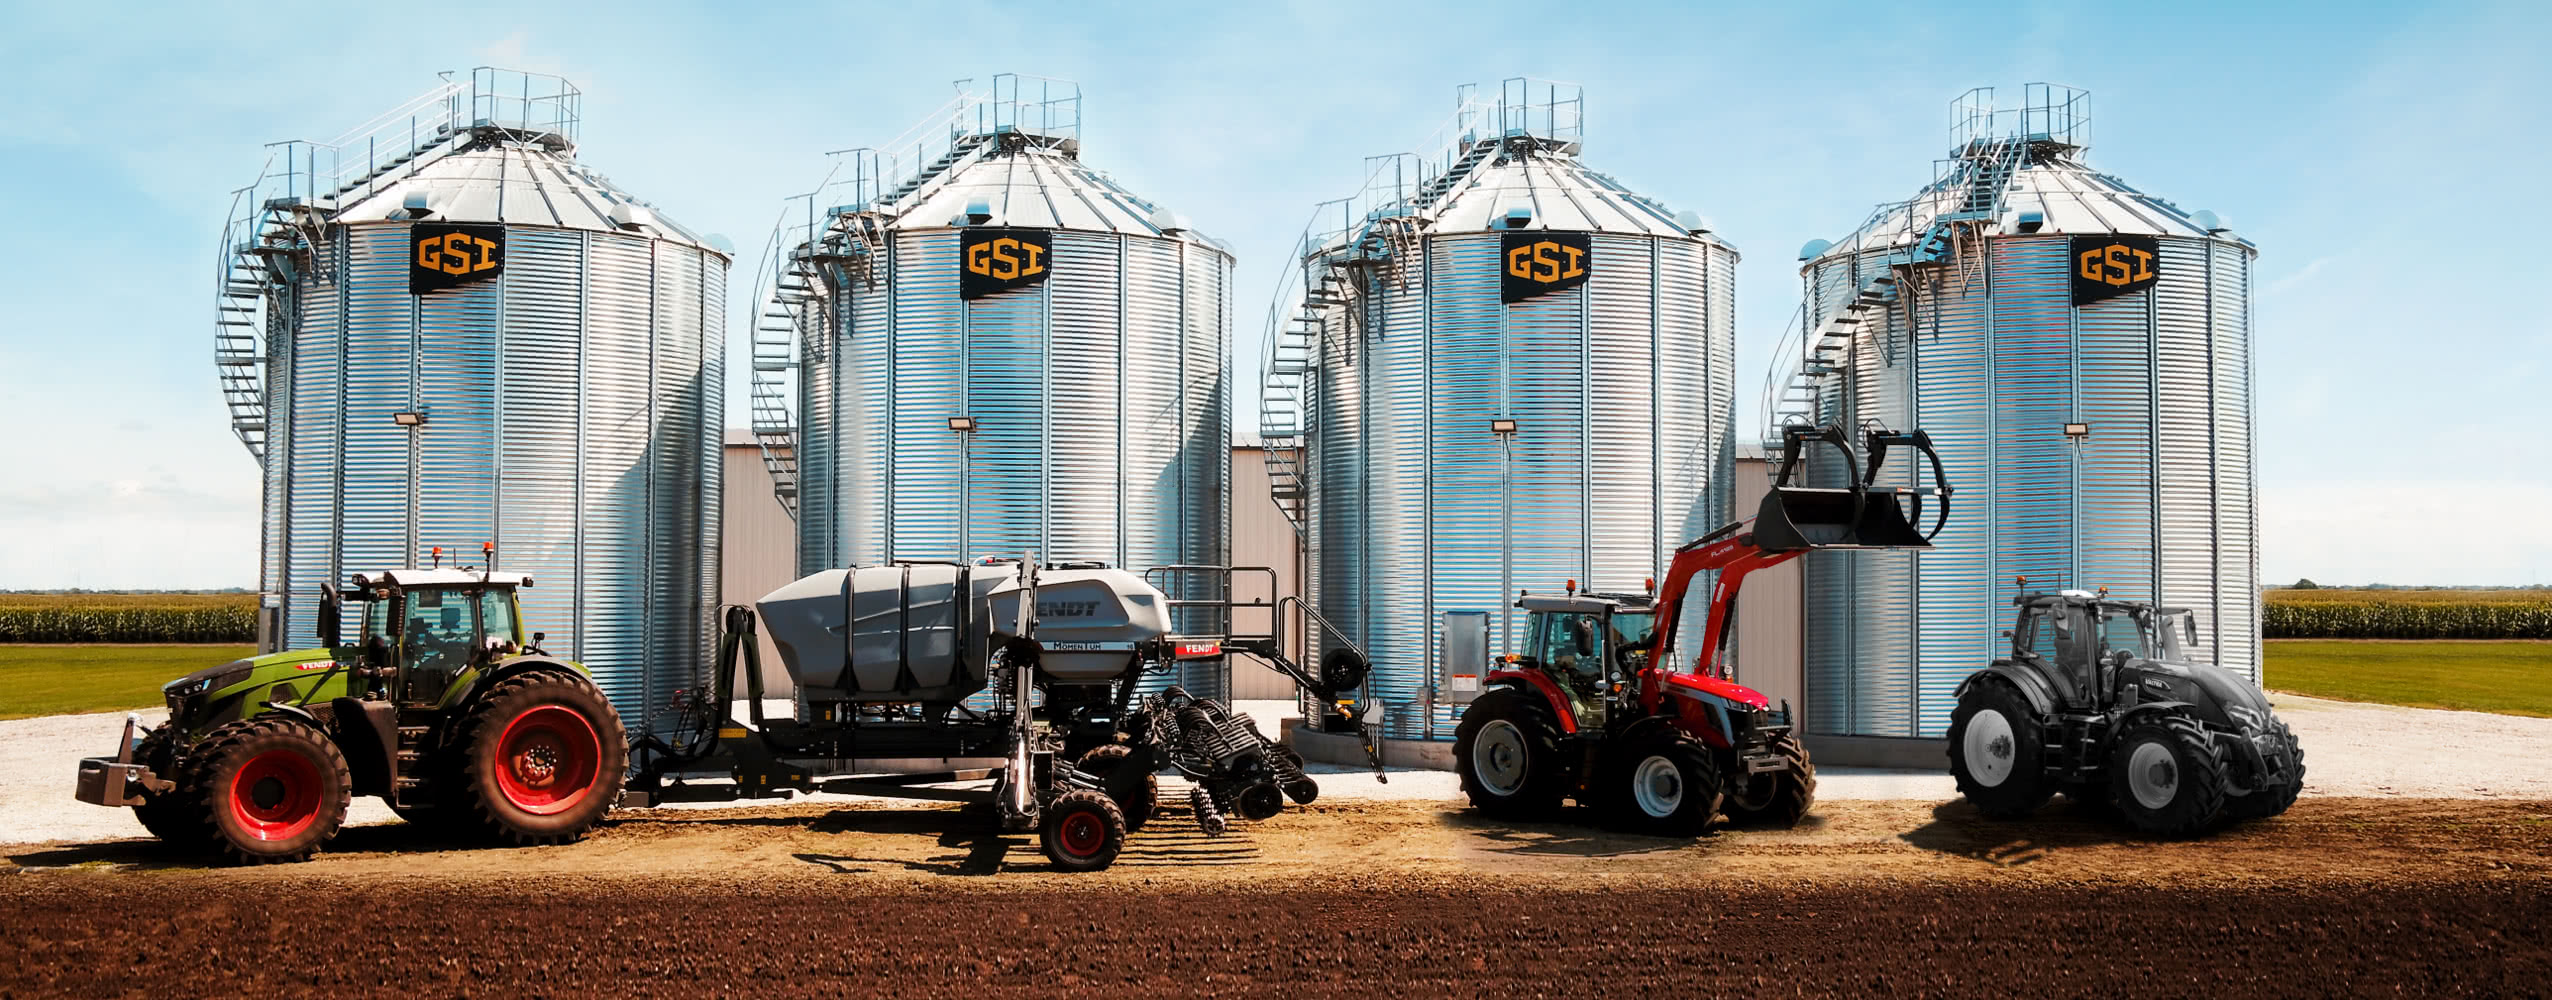 Three tractors, of differing models, are parked in front of four GSI branded grain silos